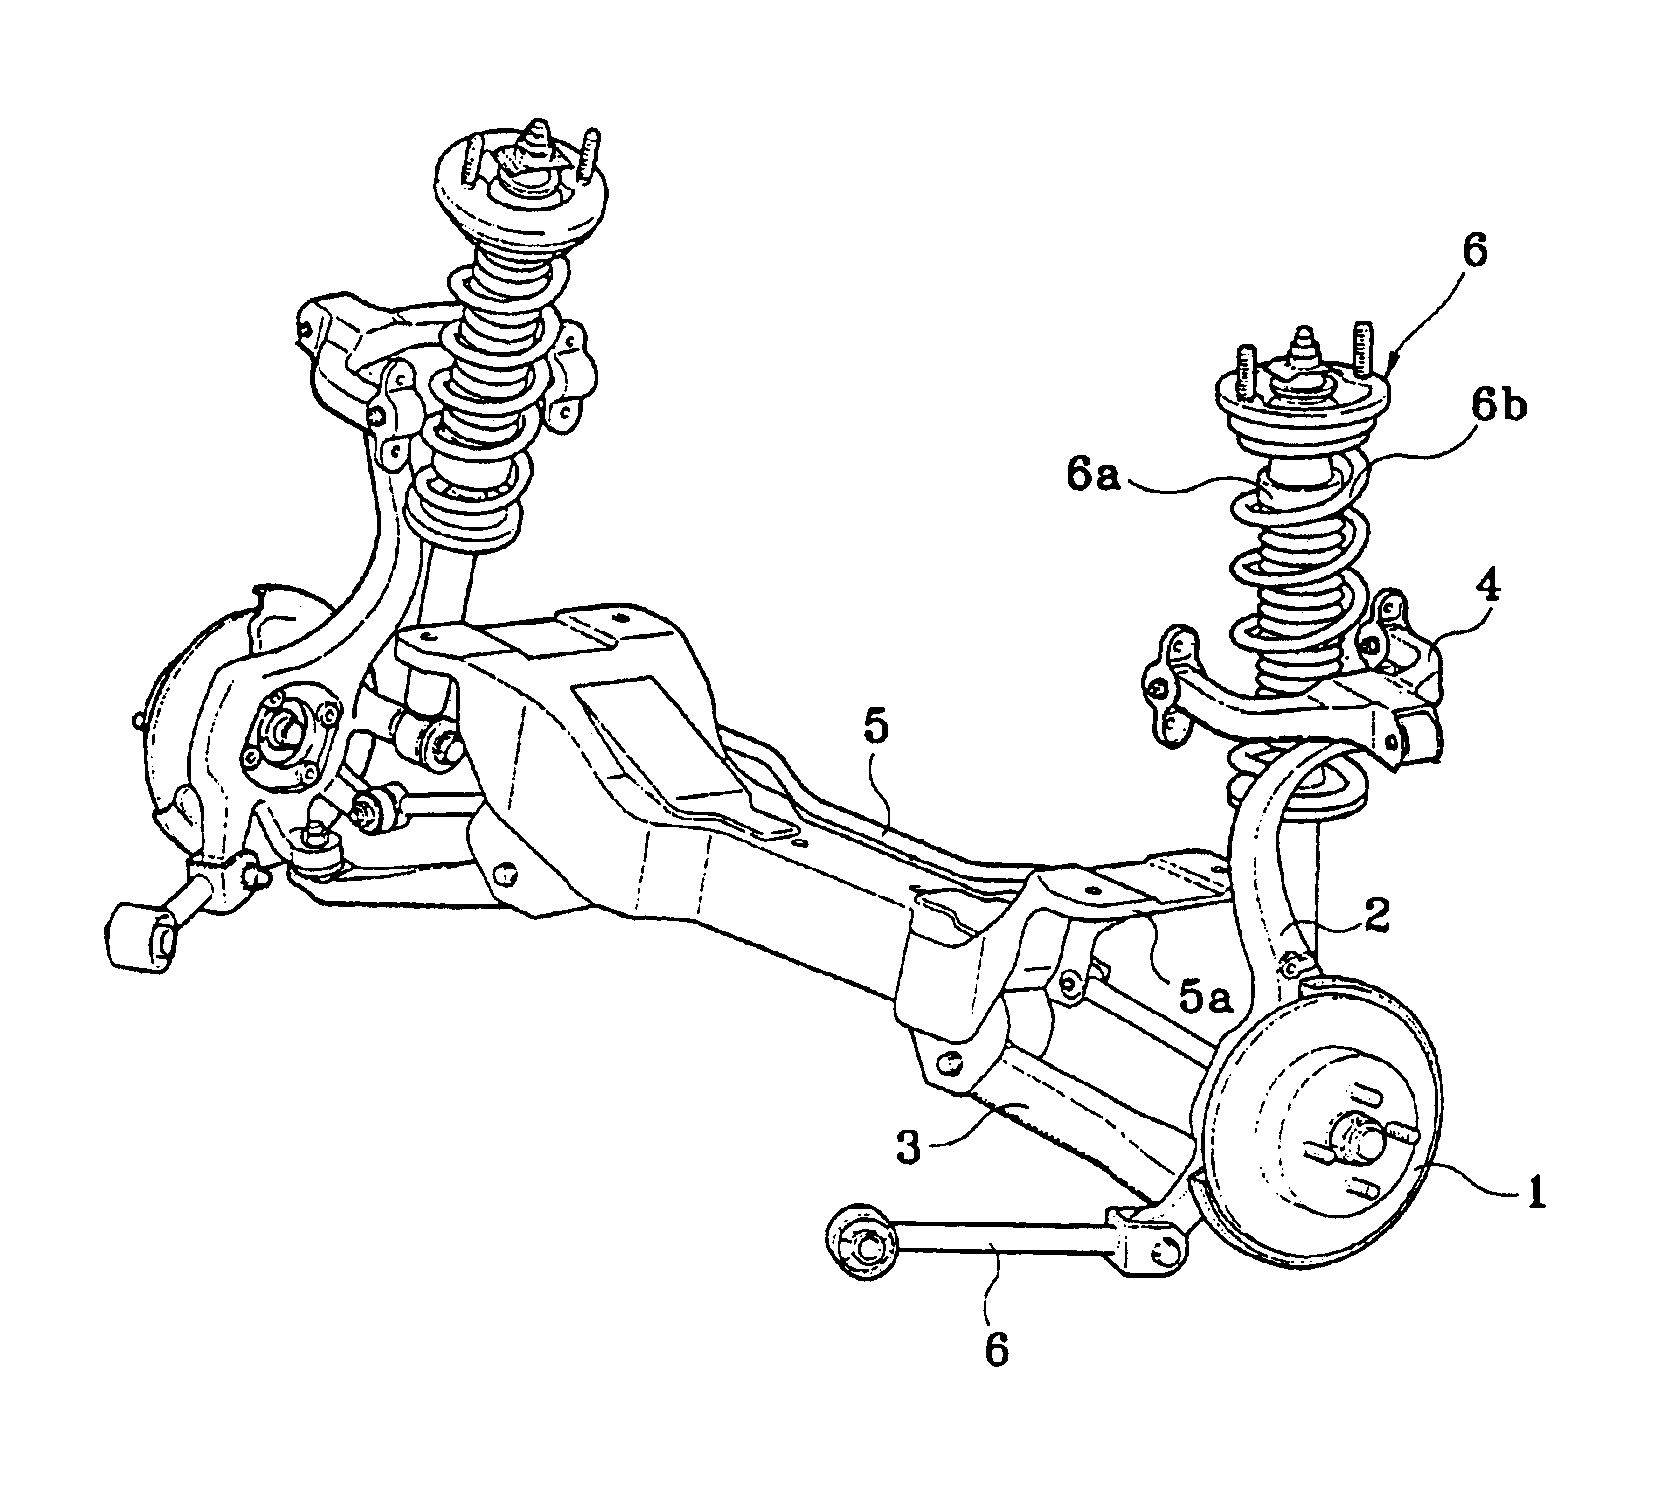 Rear suspension connecting part structure under the floor of a vehicle